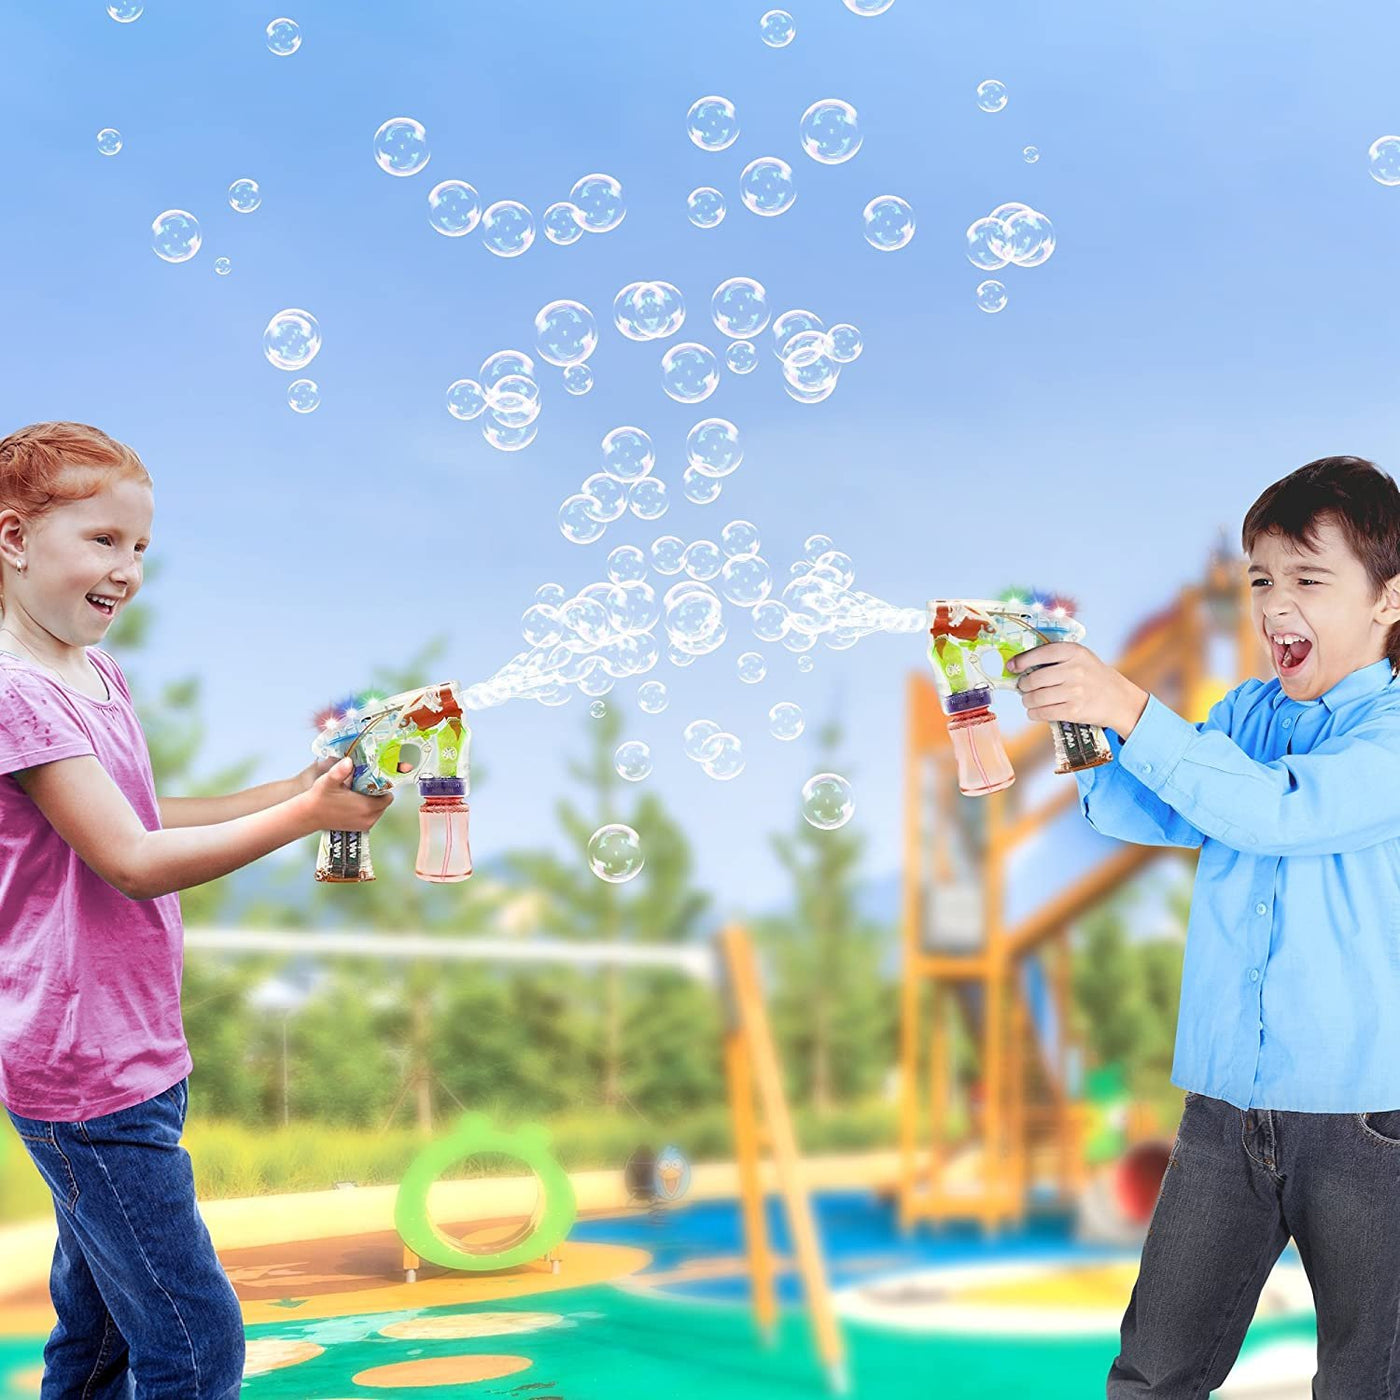 Light Up Bubble Gun - Medium Lightweight Design - Perfect for Summertime - Fun, Engaging, and Entertaining - Party Favor, Amazing Gift Idea for Boys and Girls - Batteries Included